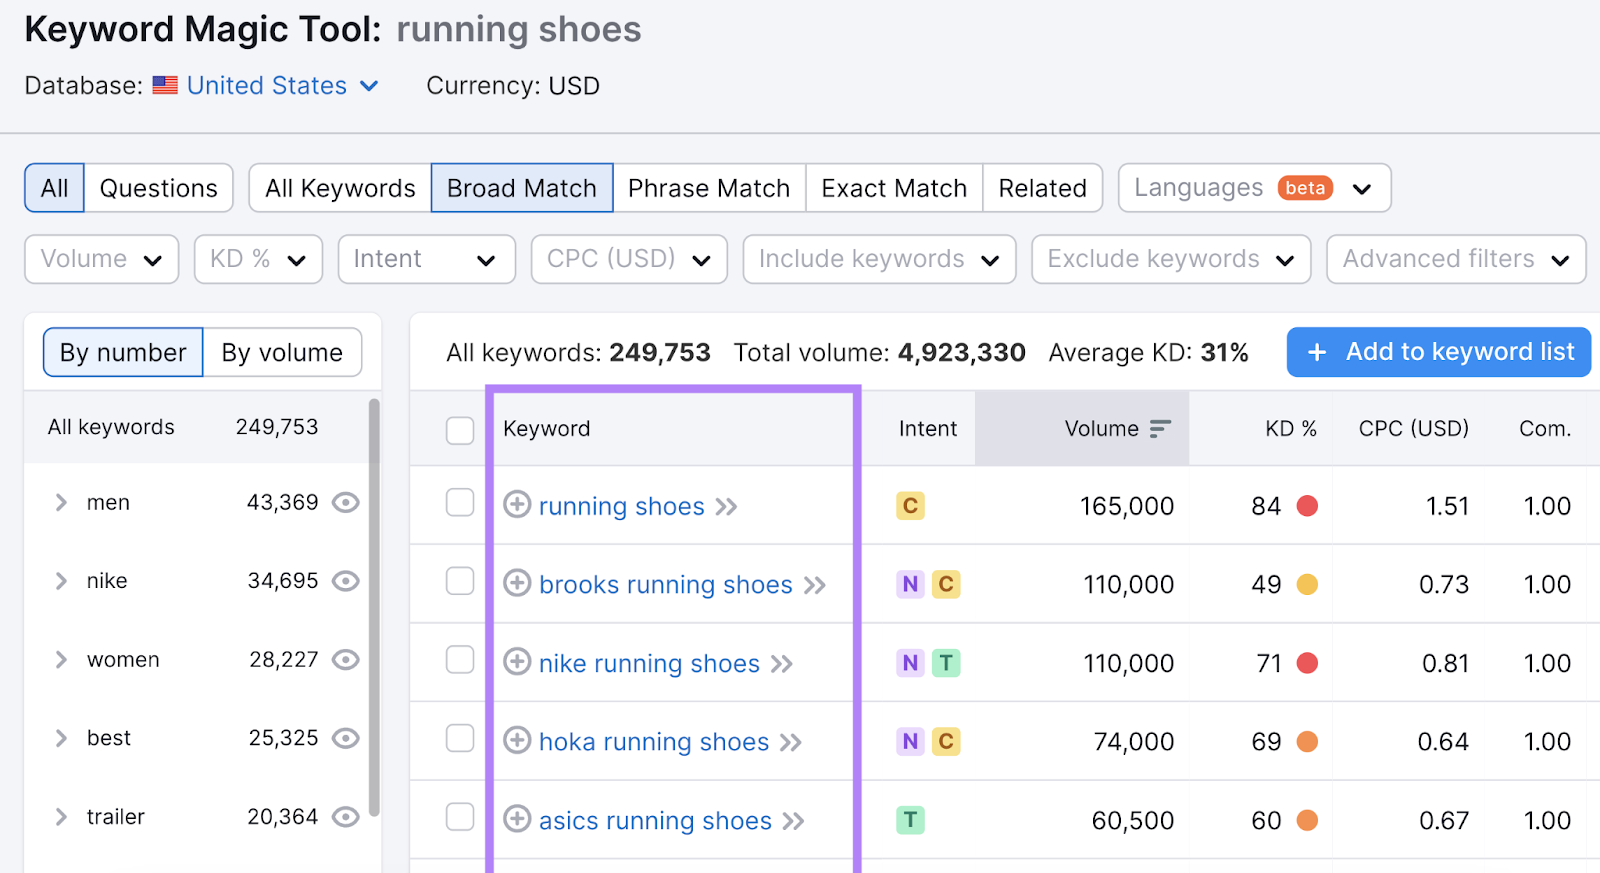 Related keywords table for "running shoes" in Keyword Magic Tool